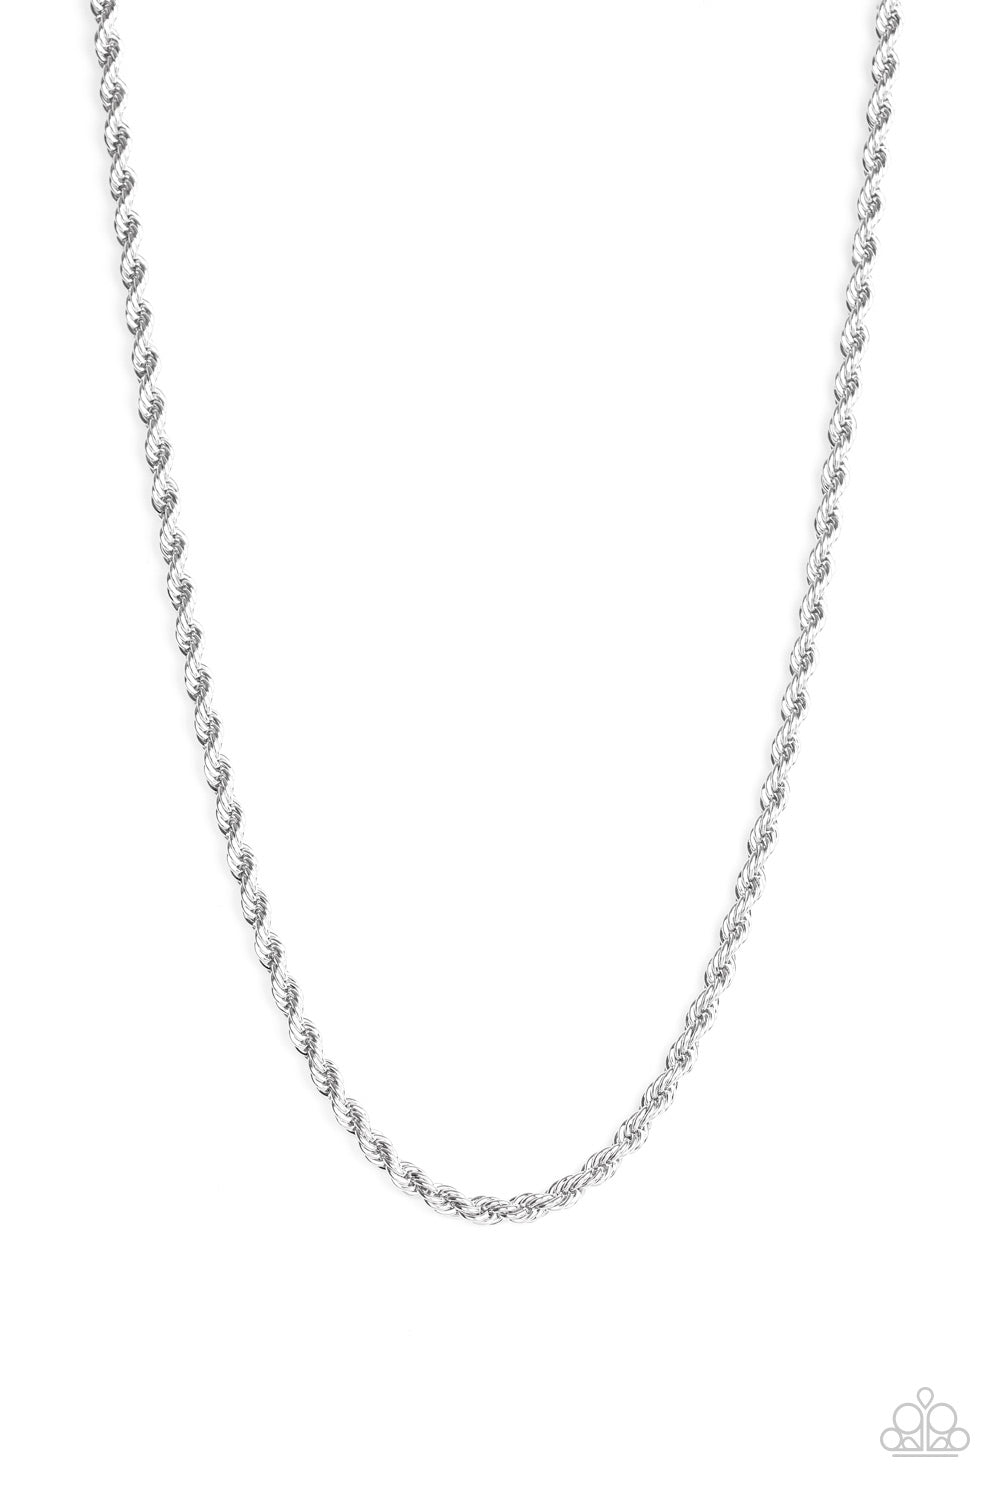 Double Dribble Silver Urban Necklace - Paparazzi Accessories